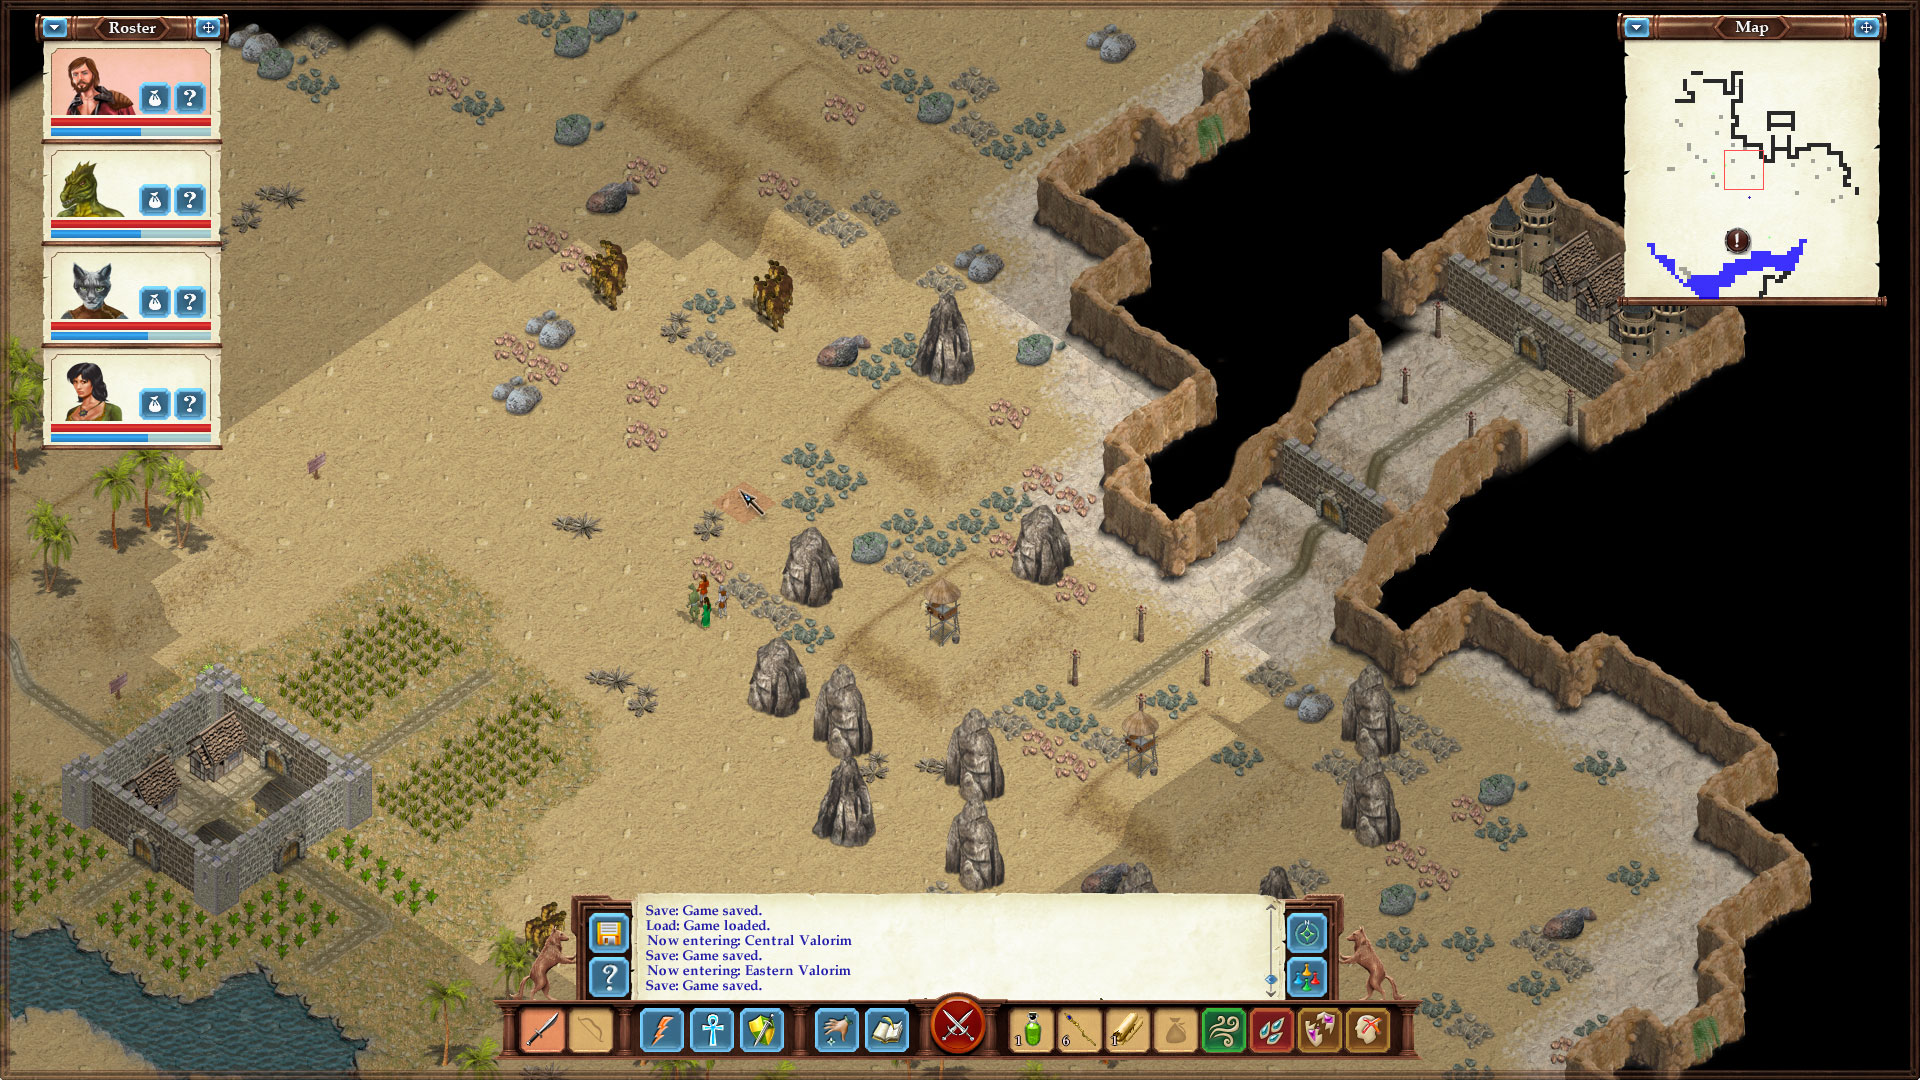 Spiderweb's 'Avernum 3: Ruined World HD' is Heading to iPad April 18th